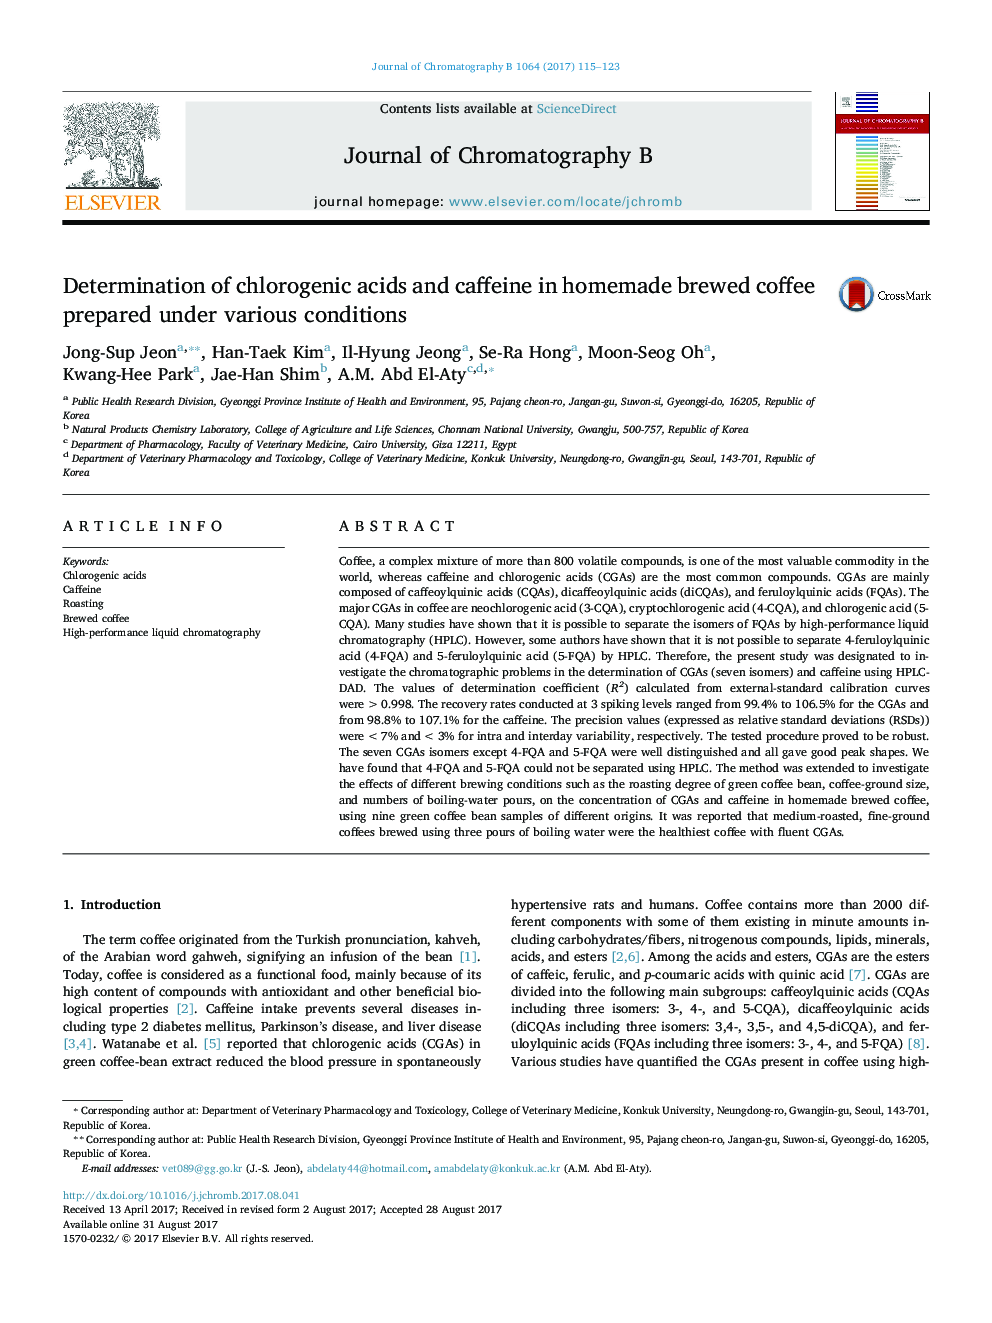 Determination of chlorogenic acids and caffeine in homemade brewed coffee prepared under various conditions